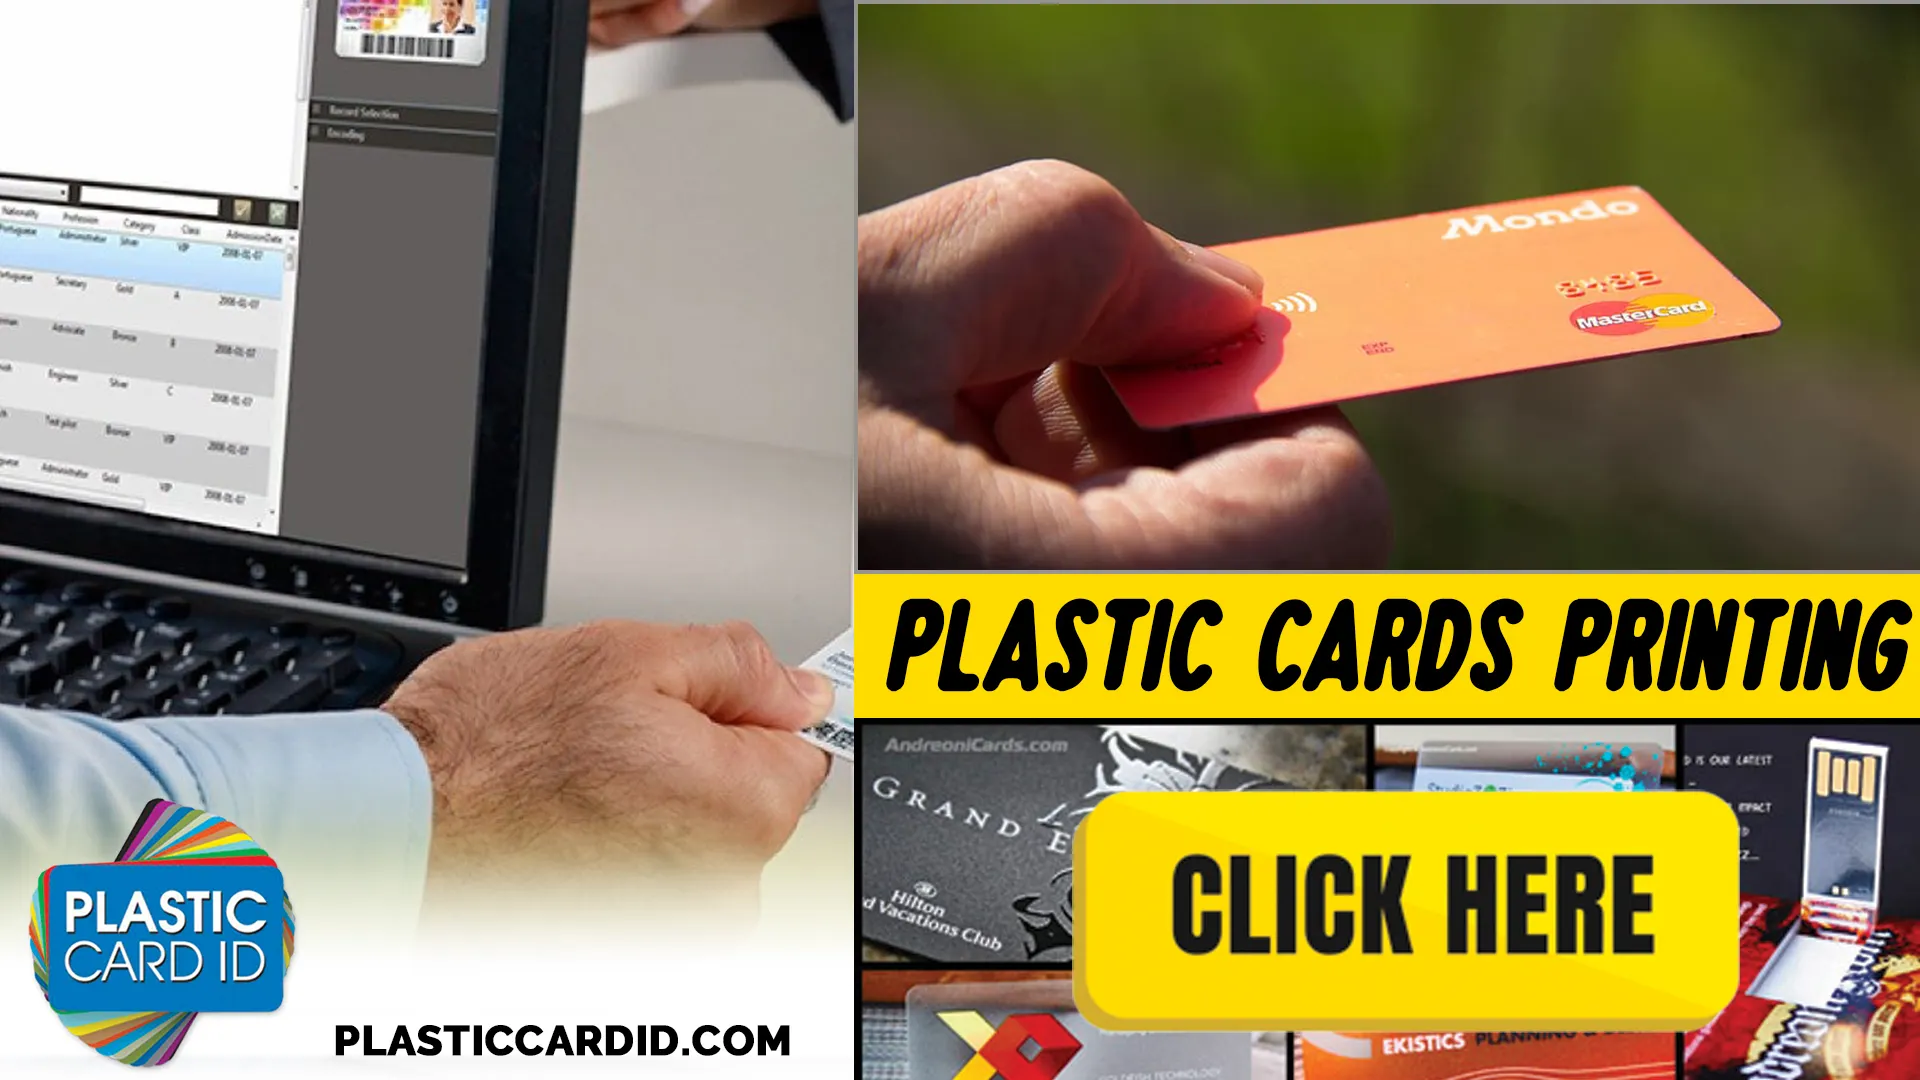 The Manufacturing Process at Plastic Card ID
: Efficiency and Eco-Friendliness Hand in Hand